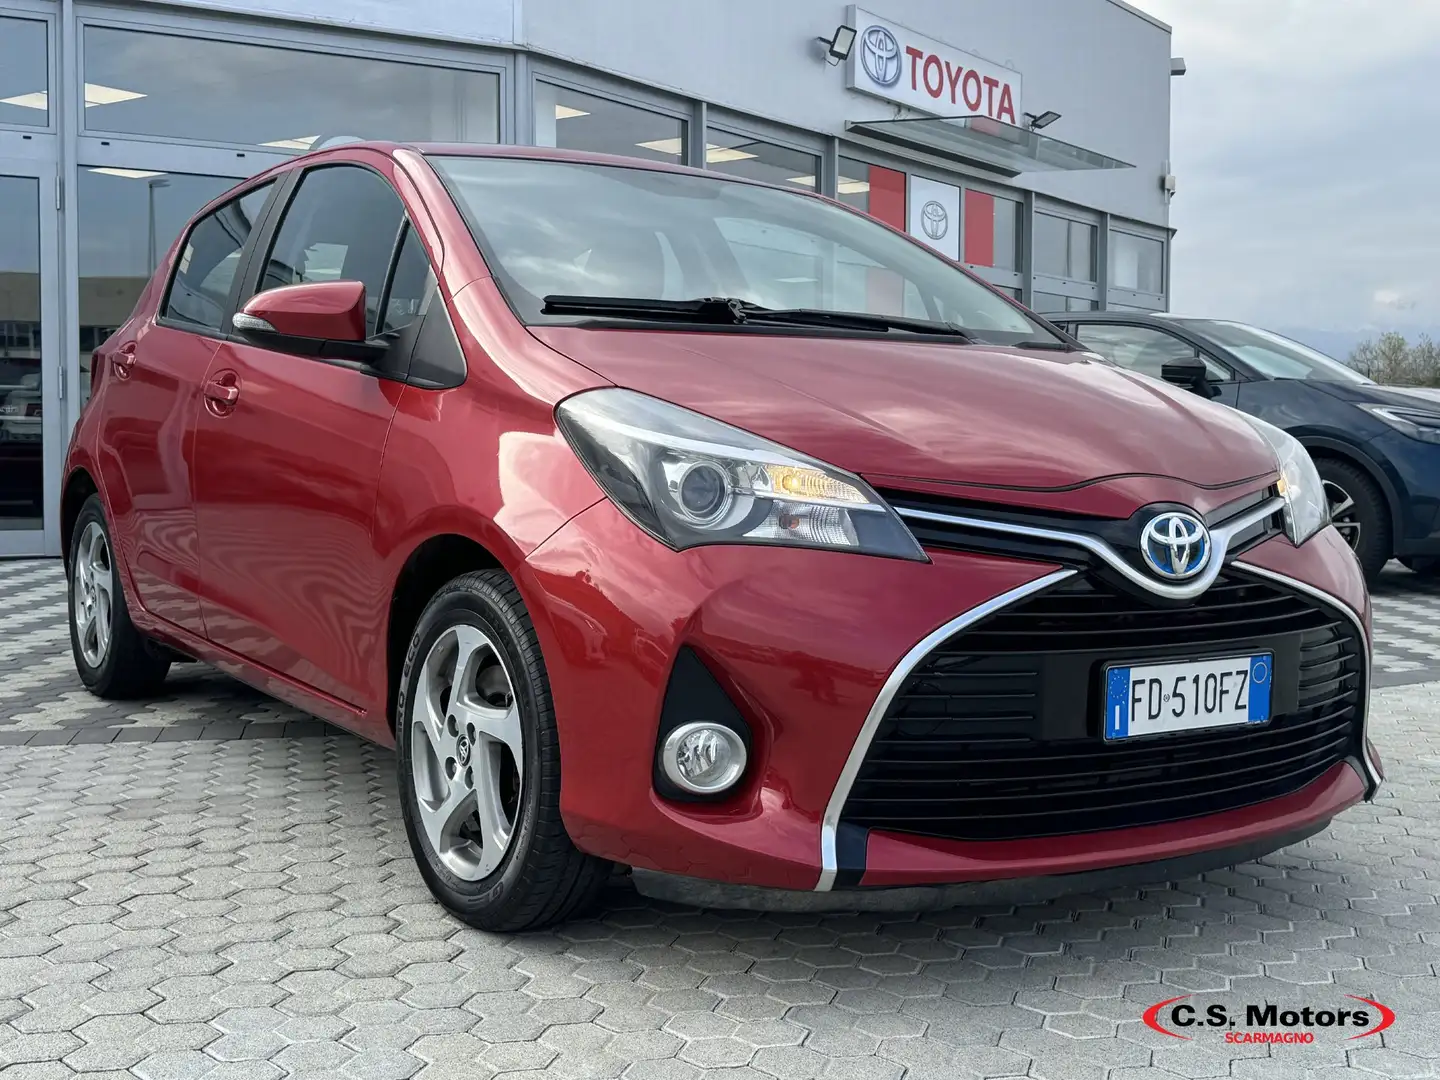 Toyota Yaris Yaris 5p 1.5h Active my16 Rosso - 2